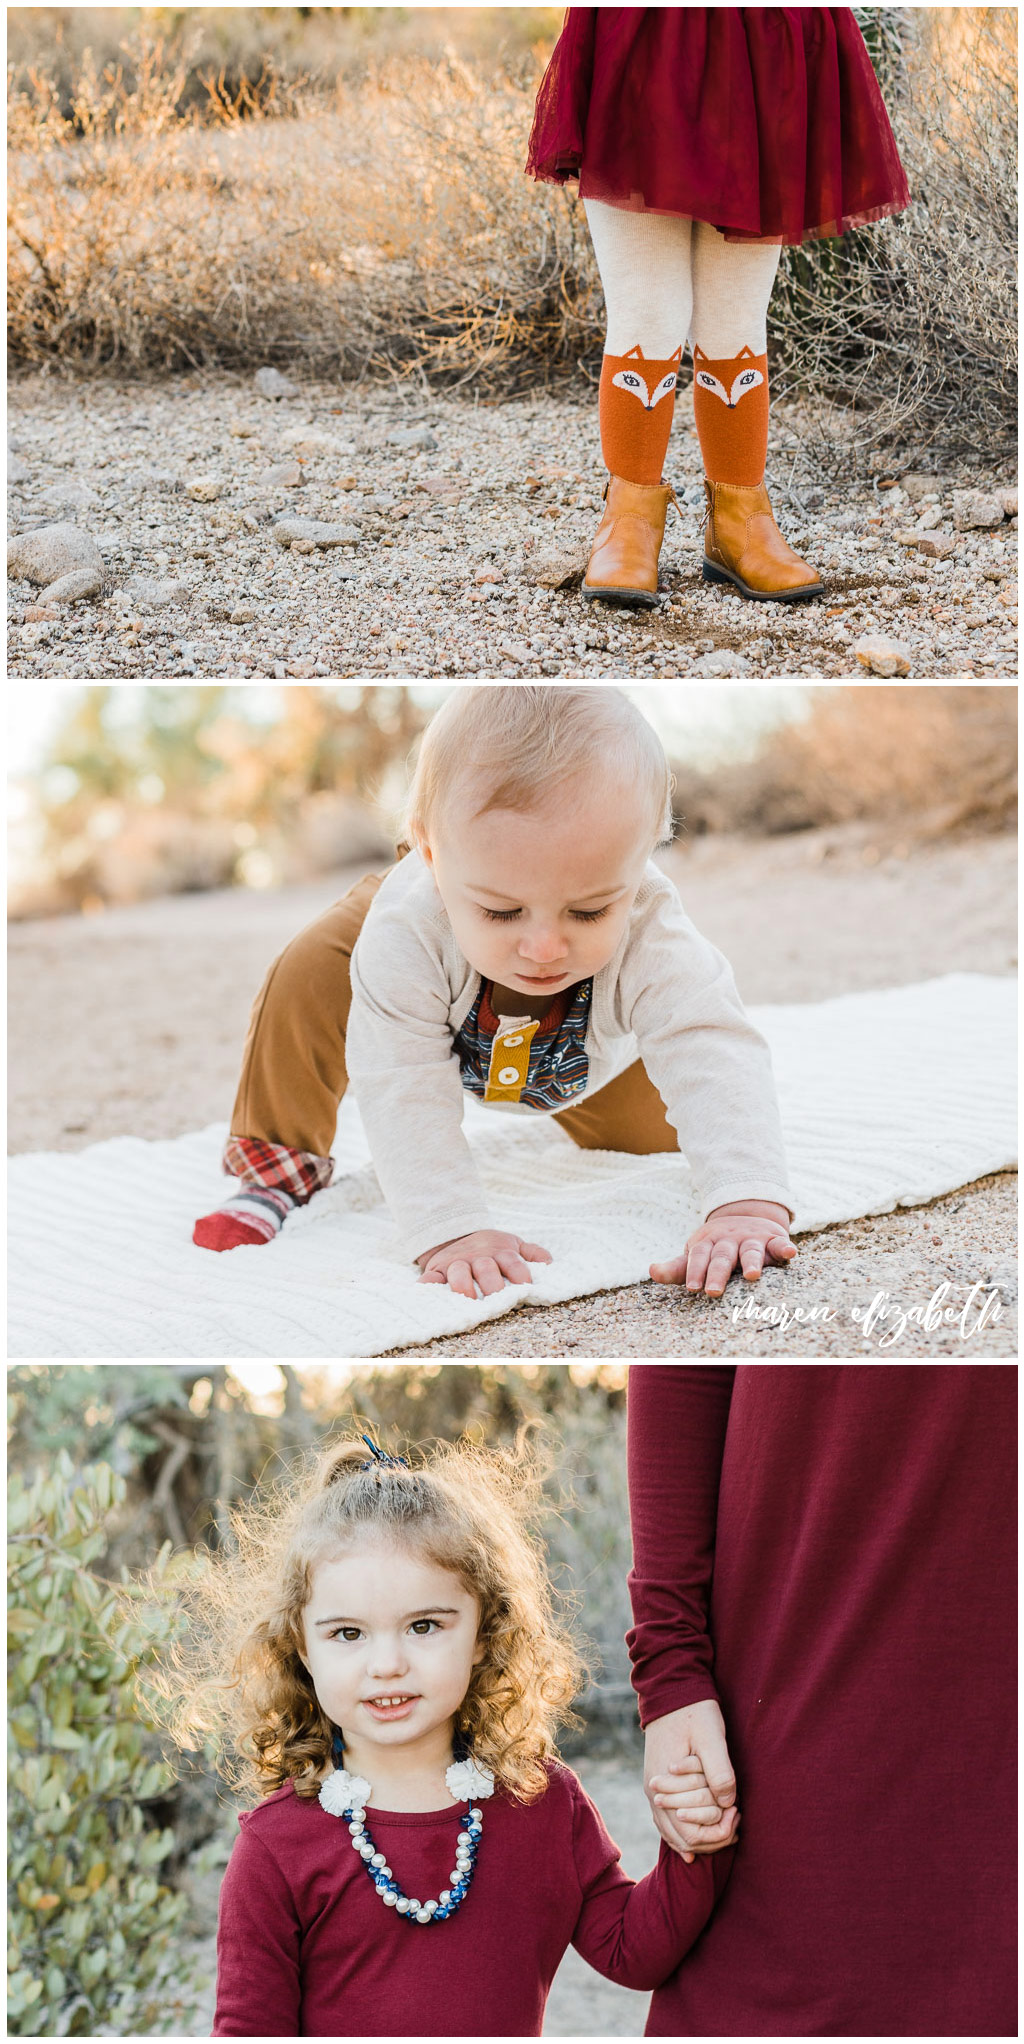 Usery Pass Family Pictures featuring a desert backdrop and navy and maroon coordinated outfits. Maren Elizabeth Photography | Gilbert, AZ